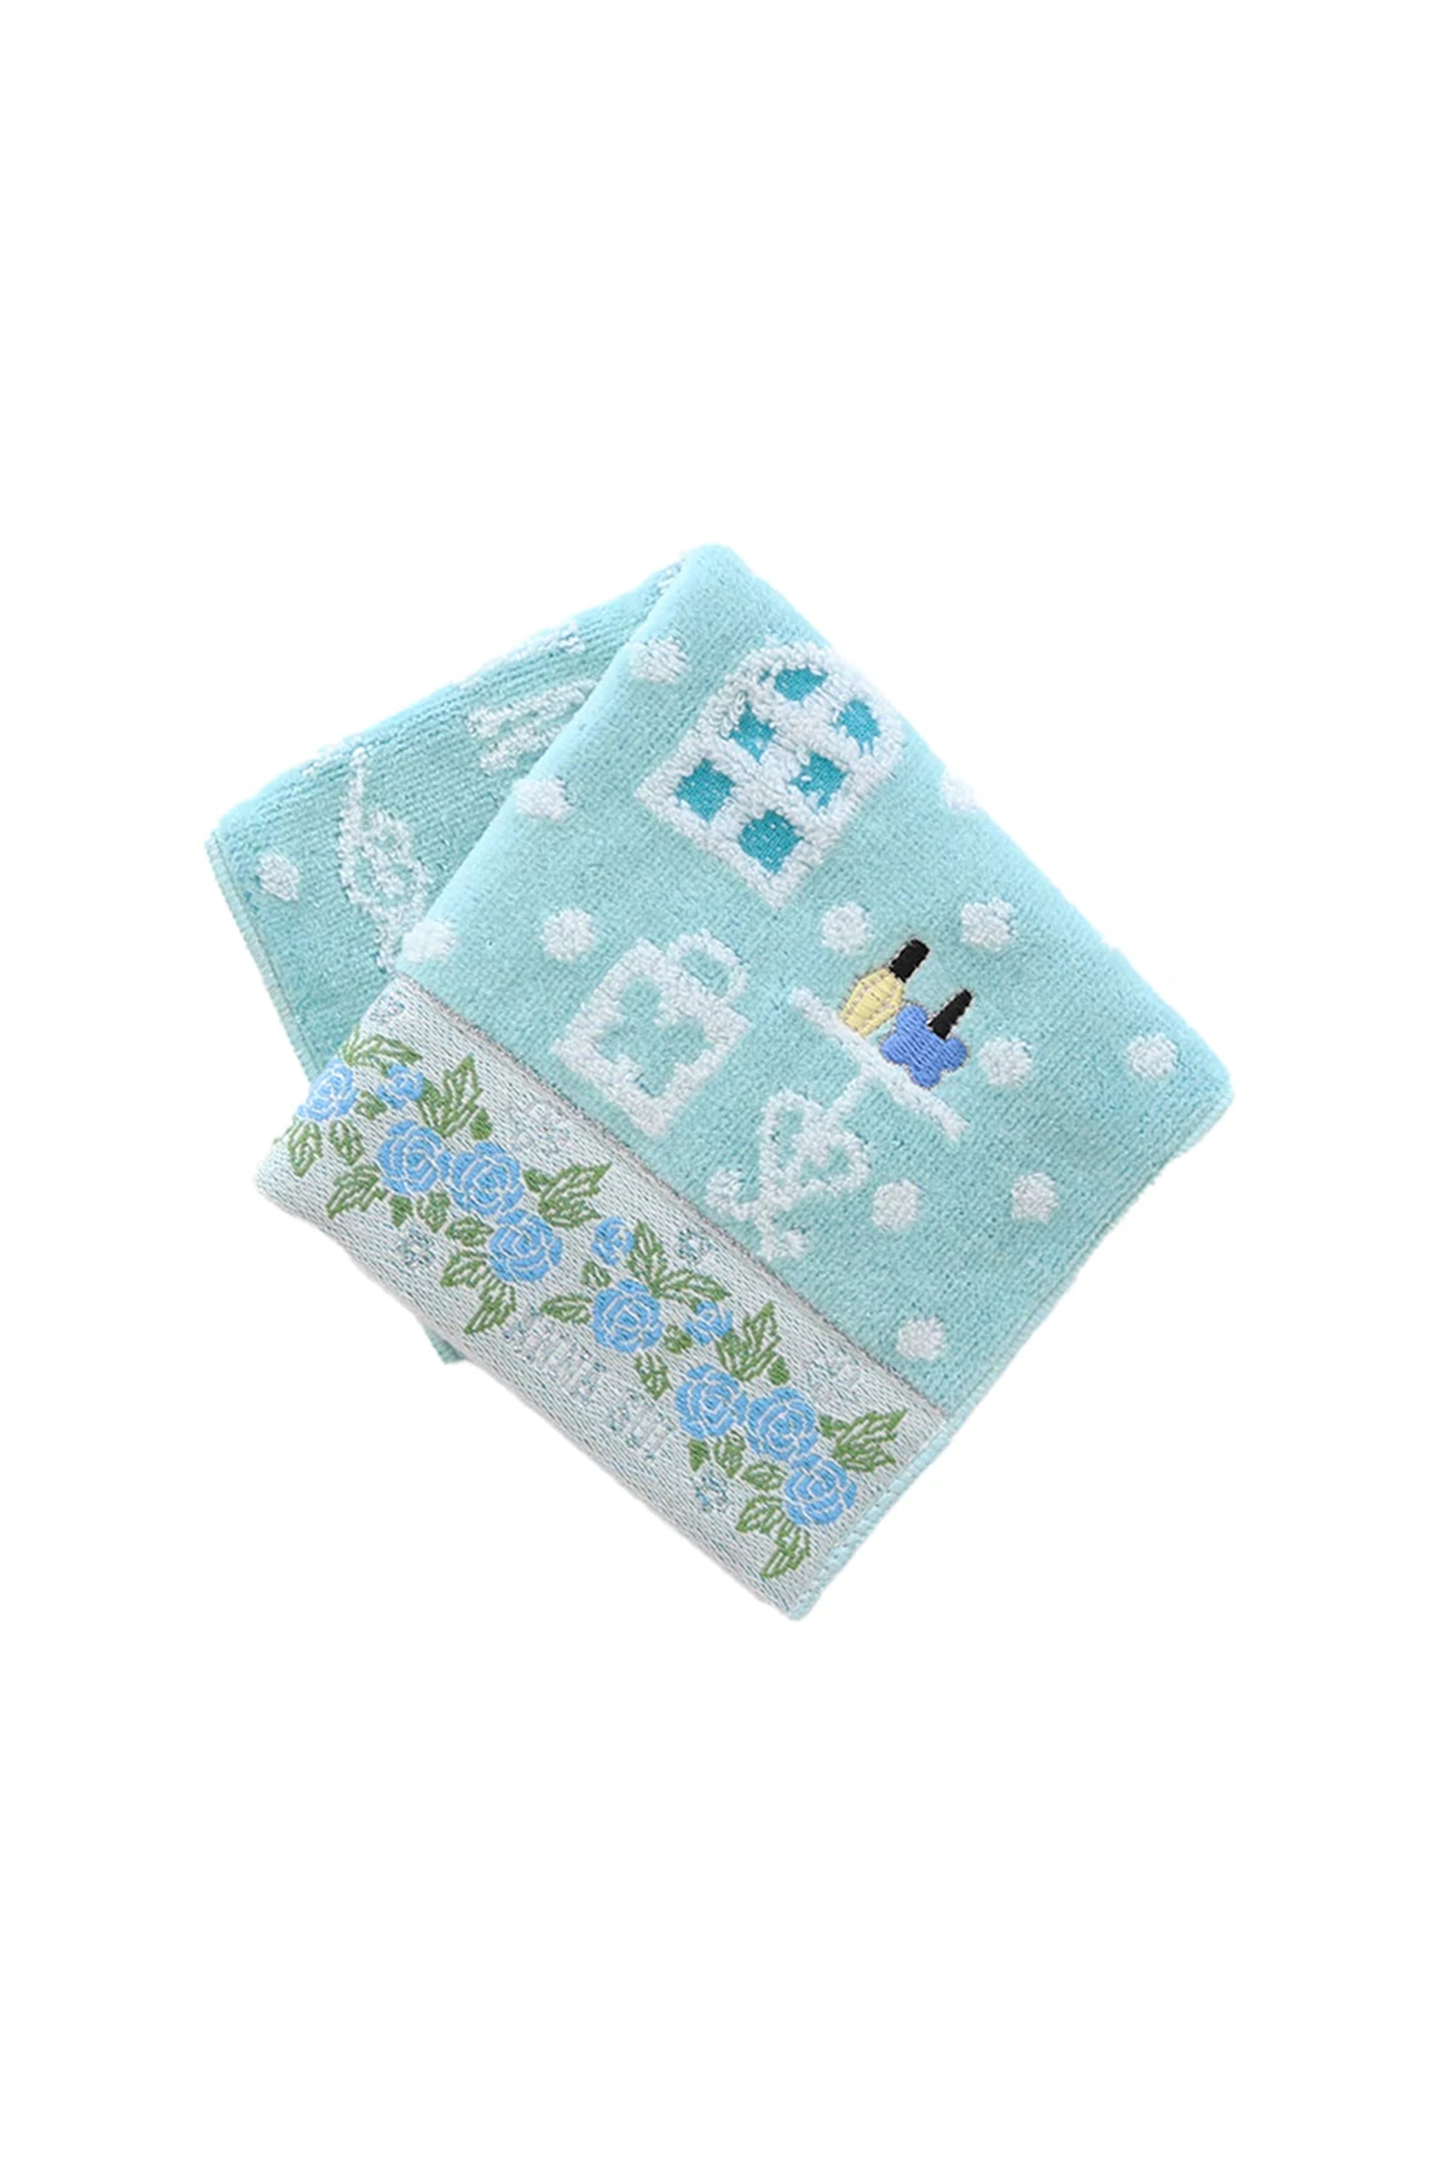 Washcloth, squared baby blue, white shop design, white Anna Sui label on bottom with blue roses line 